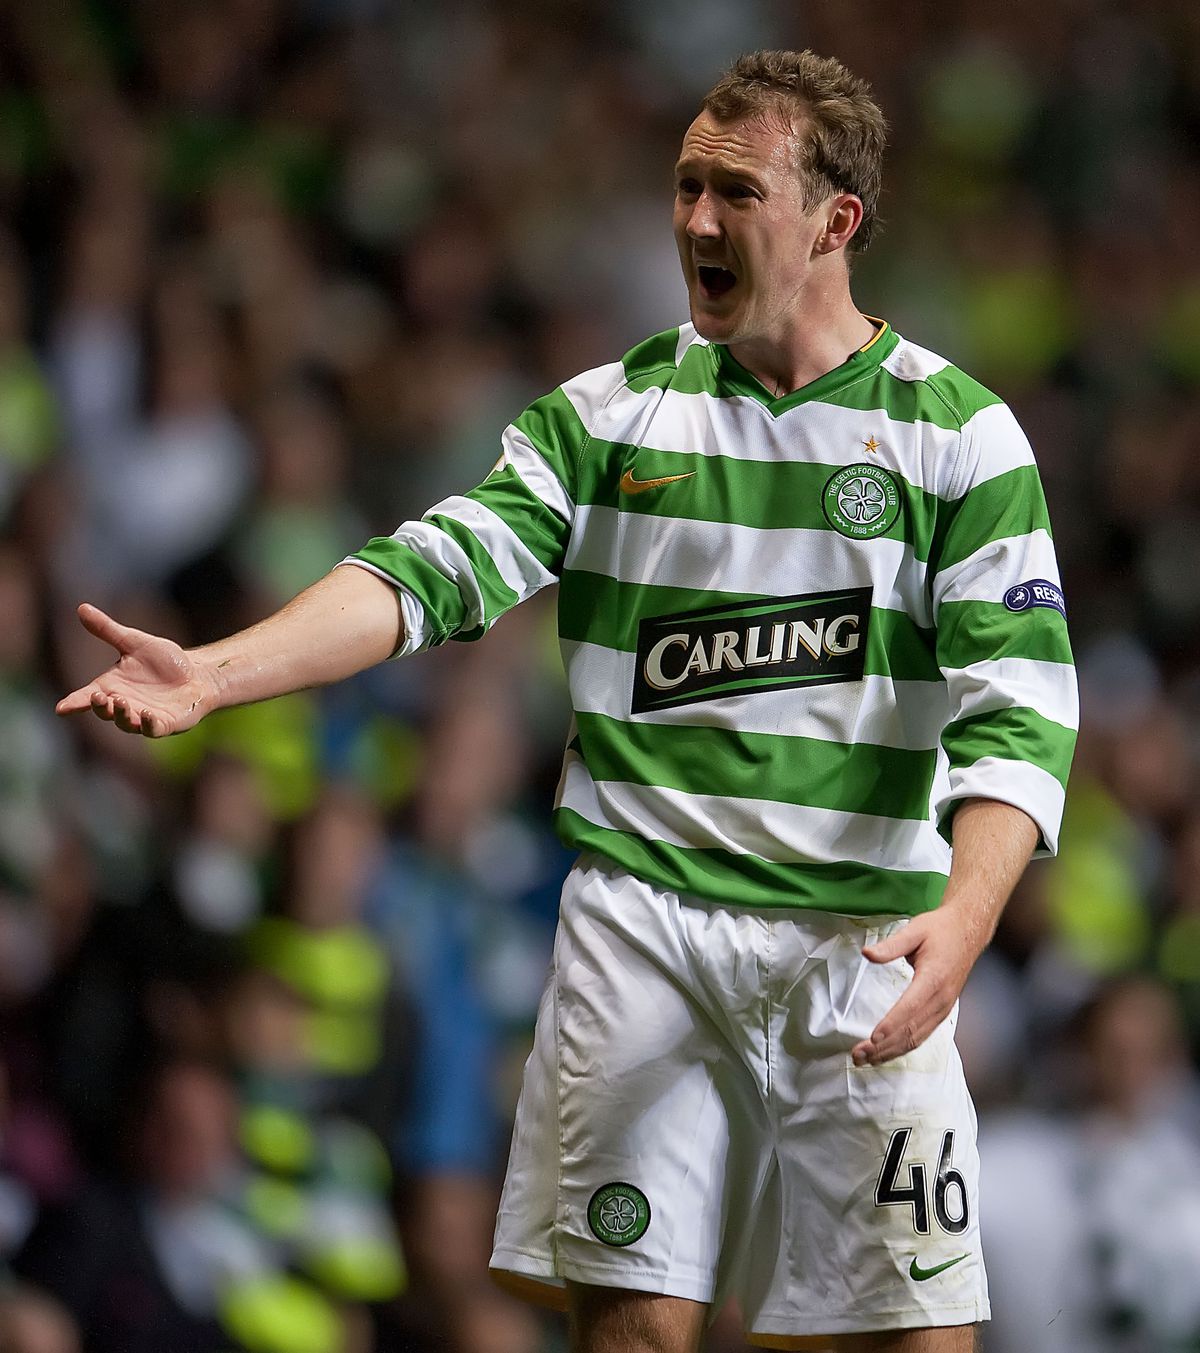 01/10/09 EUROPA LEAGUE.CELTIC v RAPID VIENNA (1-1).CELTIC PARK - GLASGOW.Aiden McGeady in action for Celtic (Photo by Steve Welsh\SNS Group via Getty Images)